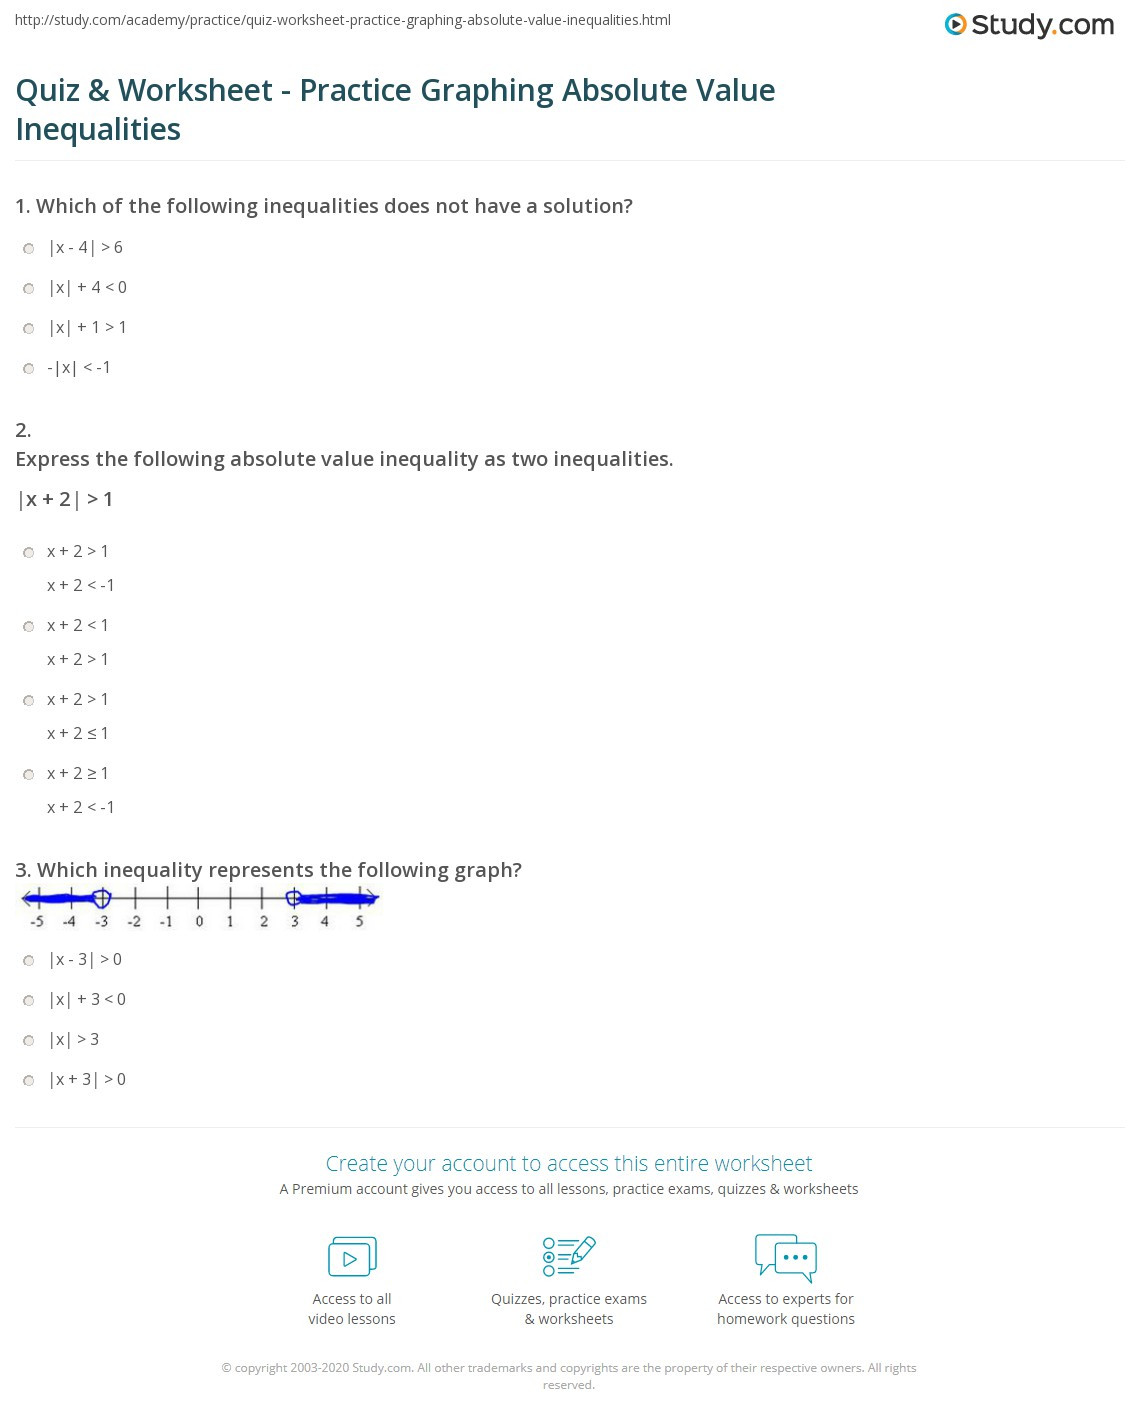 Graphing Absolute Value Functions Worksheet Quiz &amp; Worksheet Practice Graphing Absolute Value